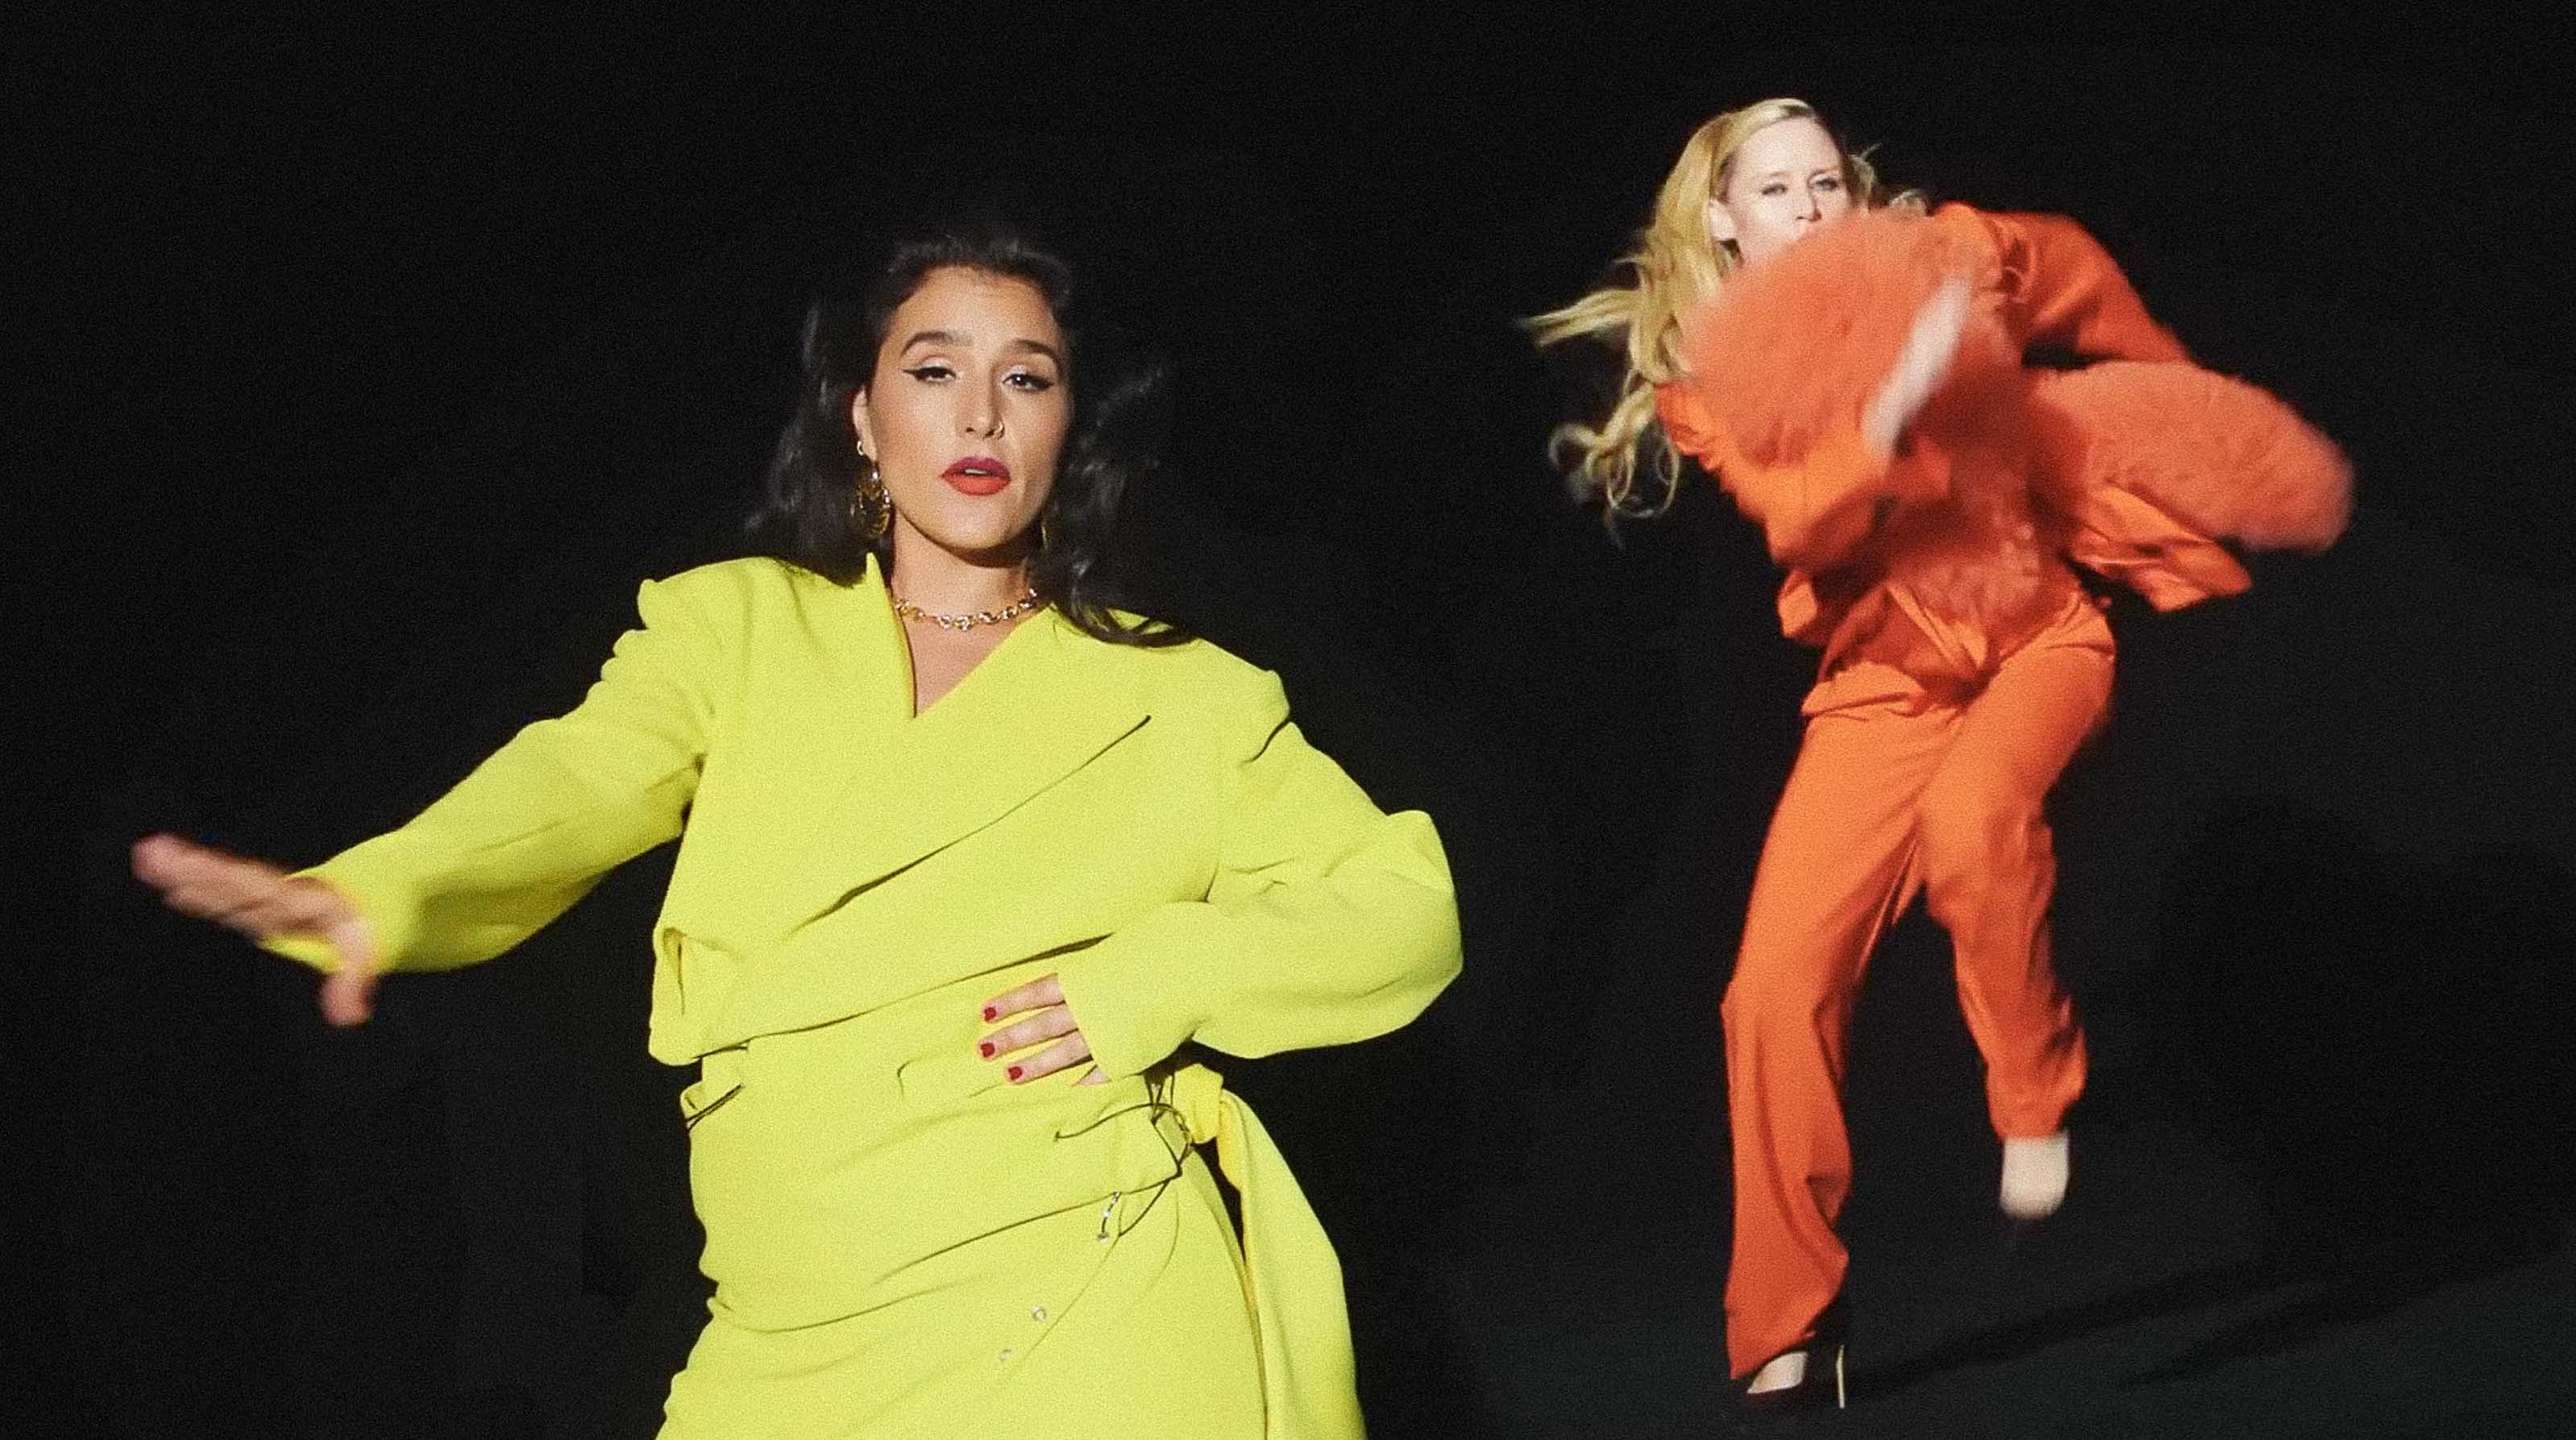 Jessie Ware and Róisín Murphy Join Forces for “Freak Me Now”: Watch the  Video